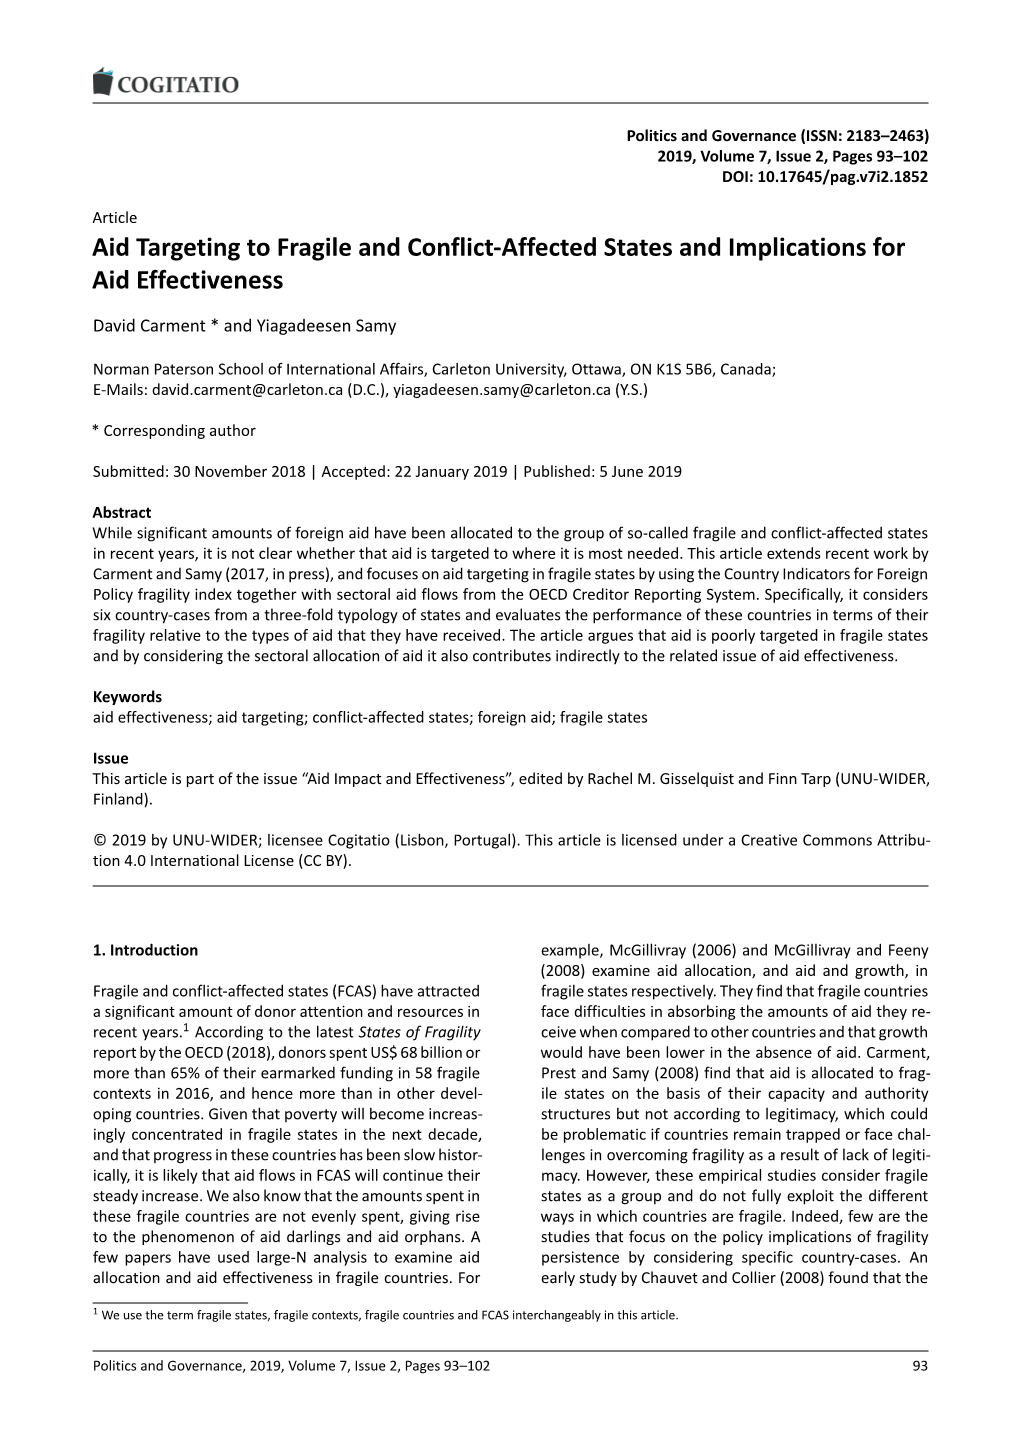 Aid Targeting to Fragile and Conflict-Affected States and Implications for Aid Effectiveness